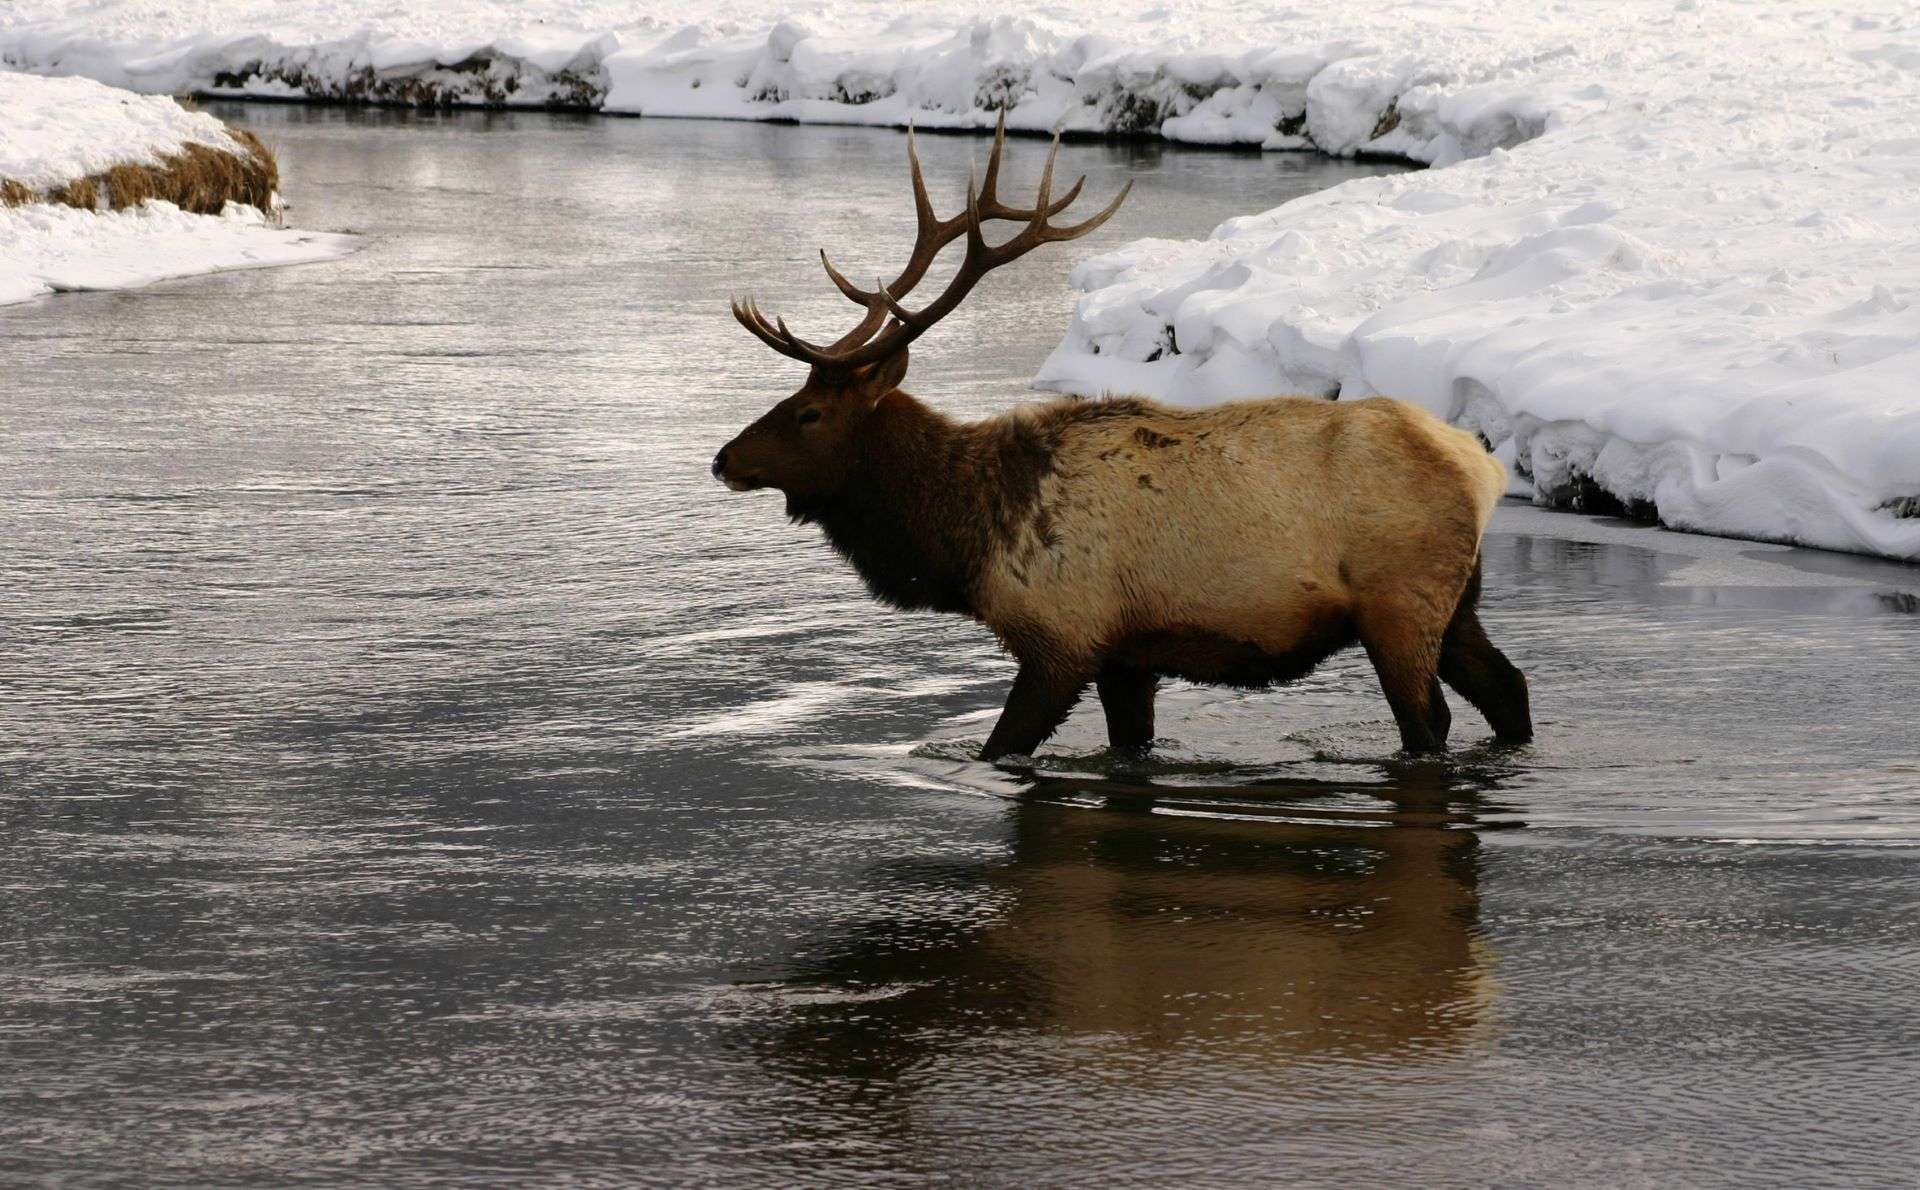 Elk crossing river in snow in Yellowstone National Park by Ben Forbes